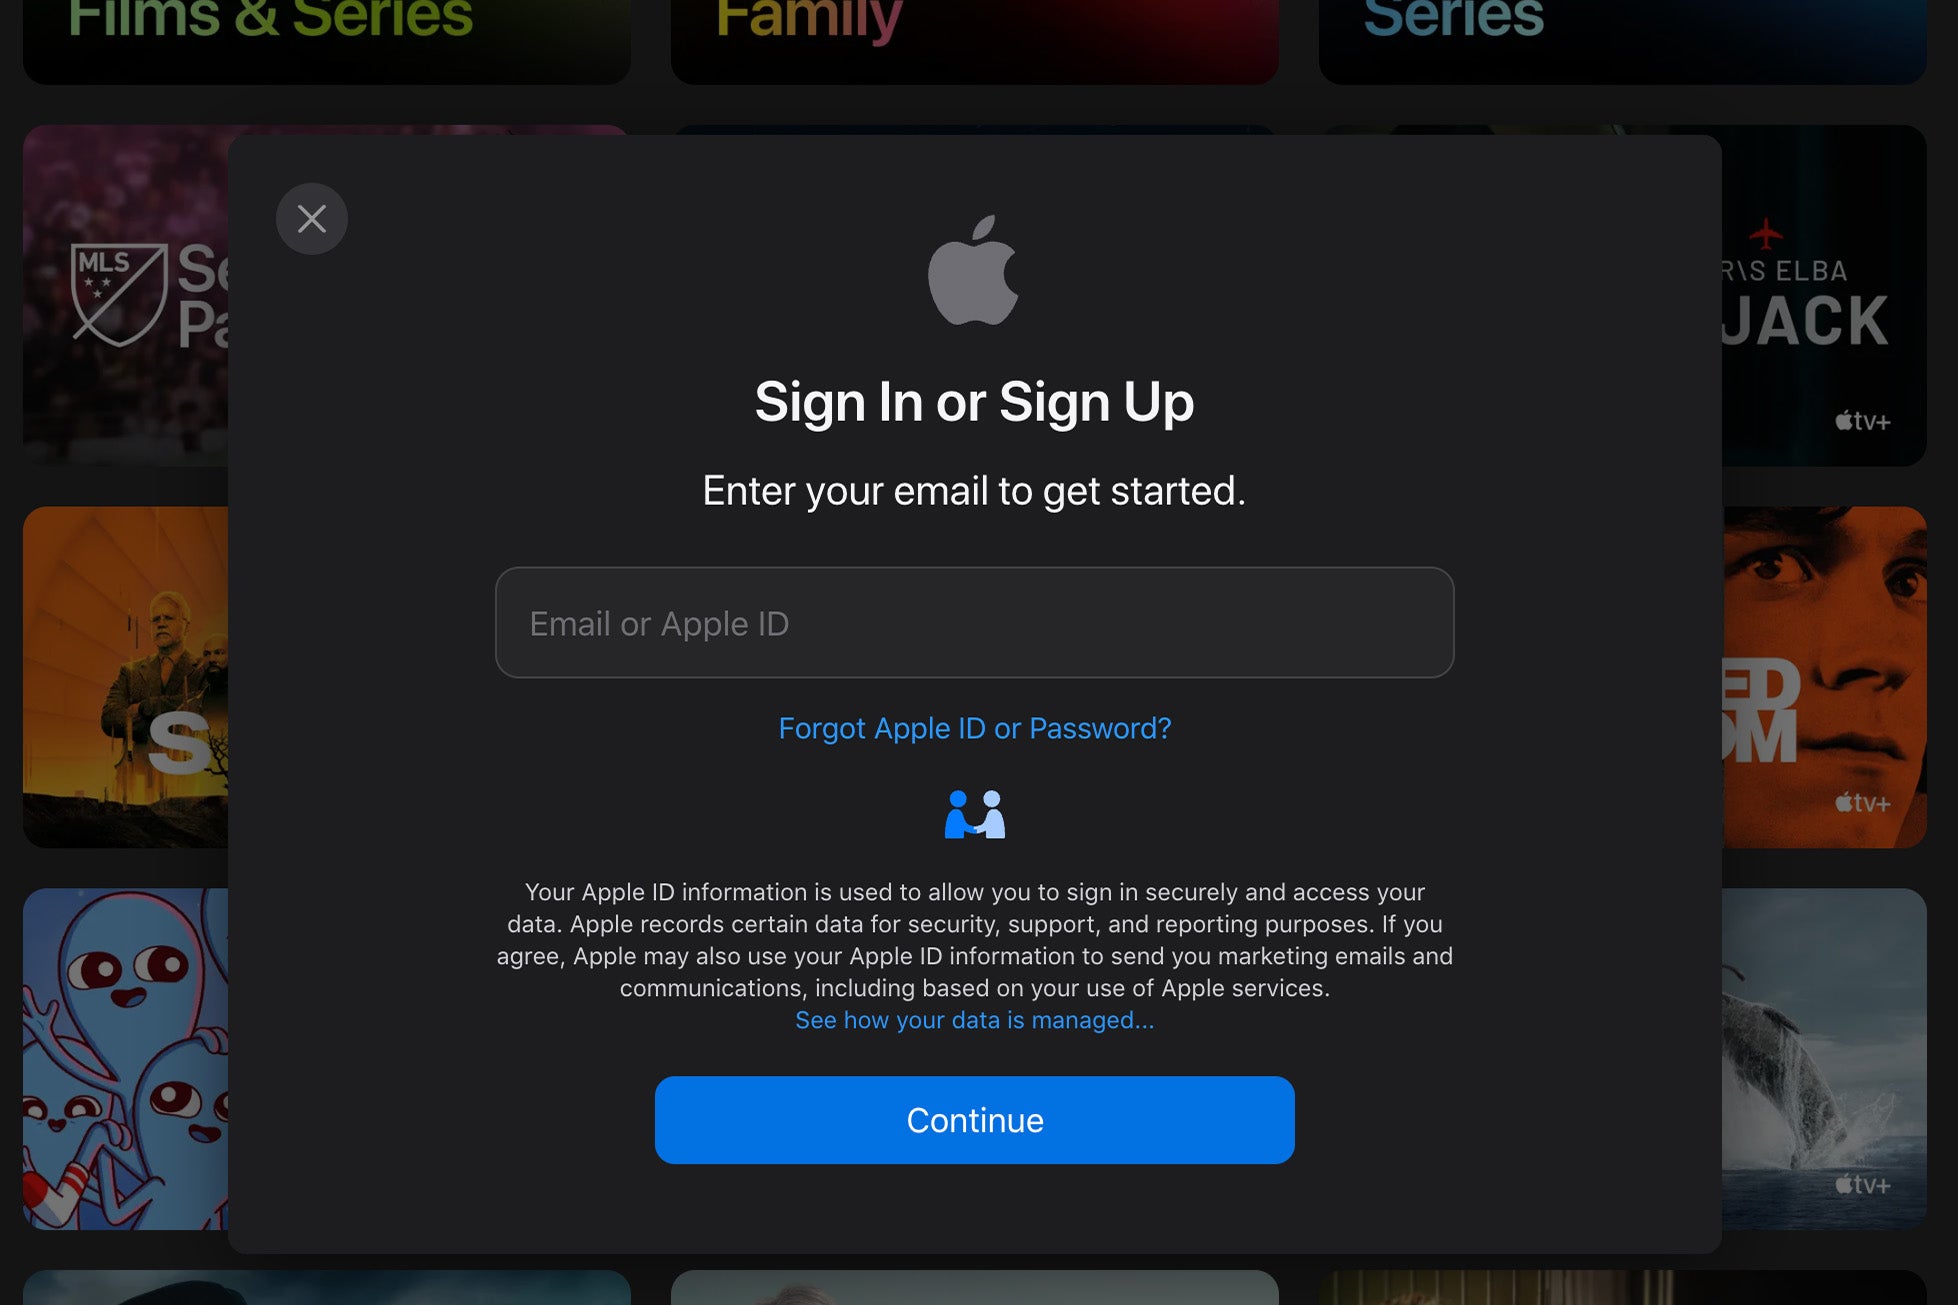 Apple TV internet browser sign in and sign up page